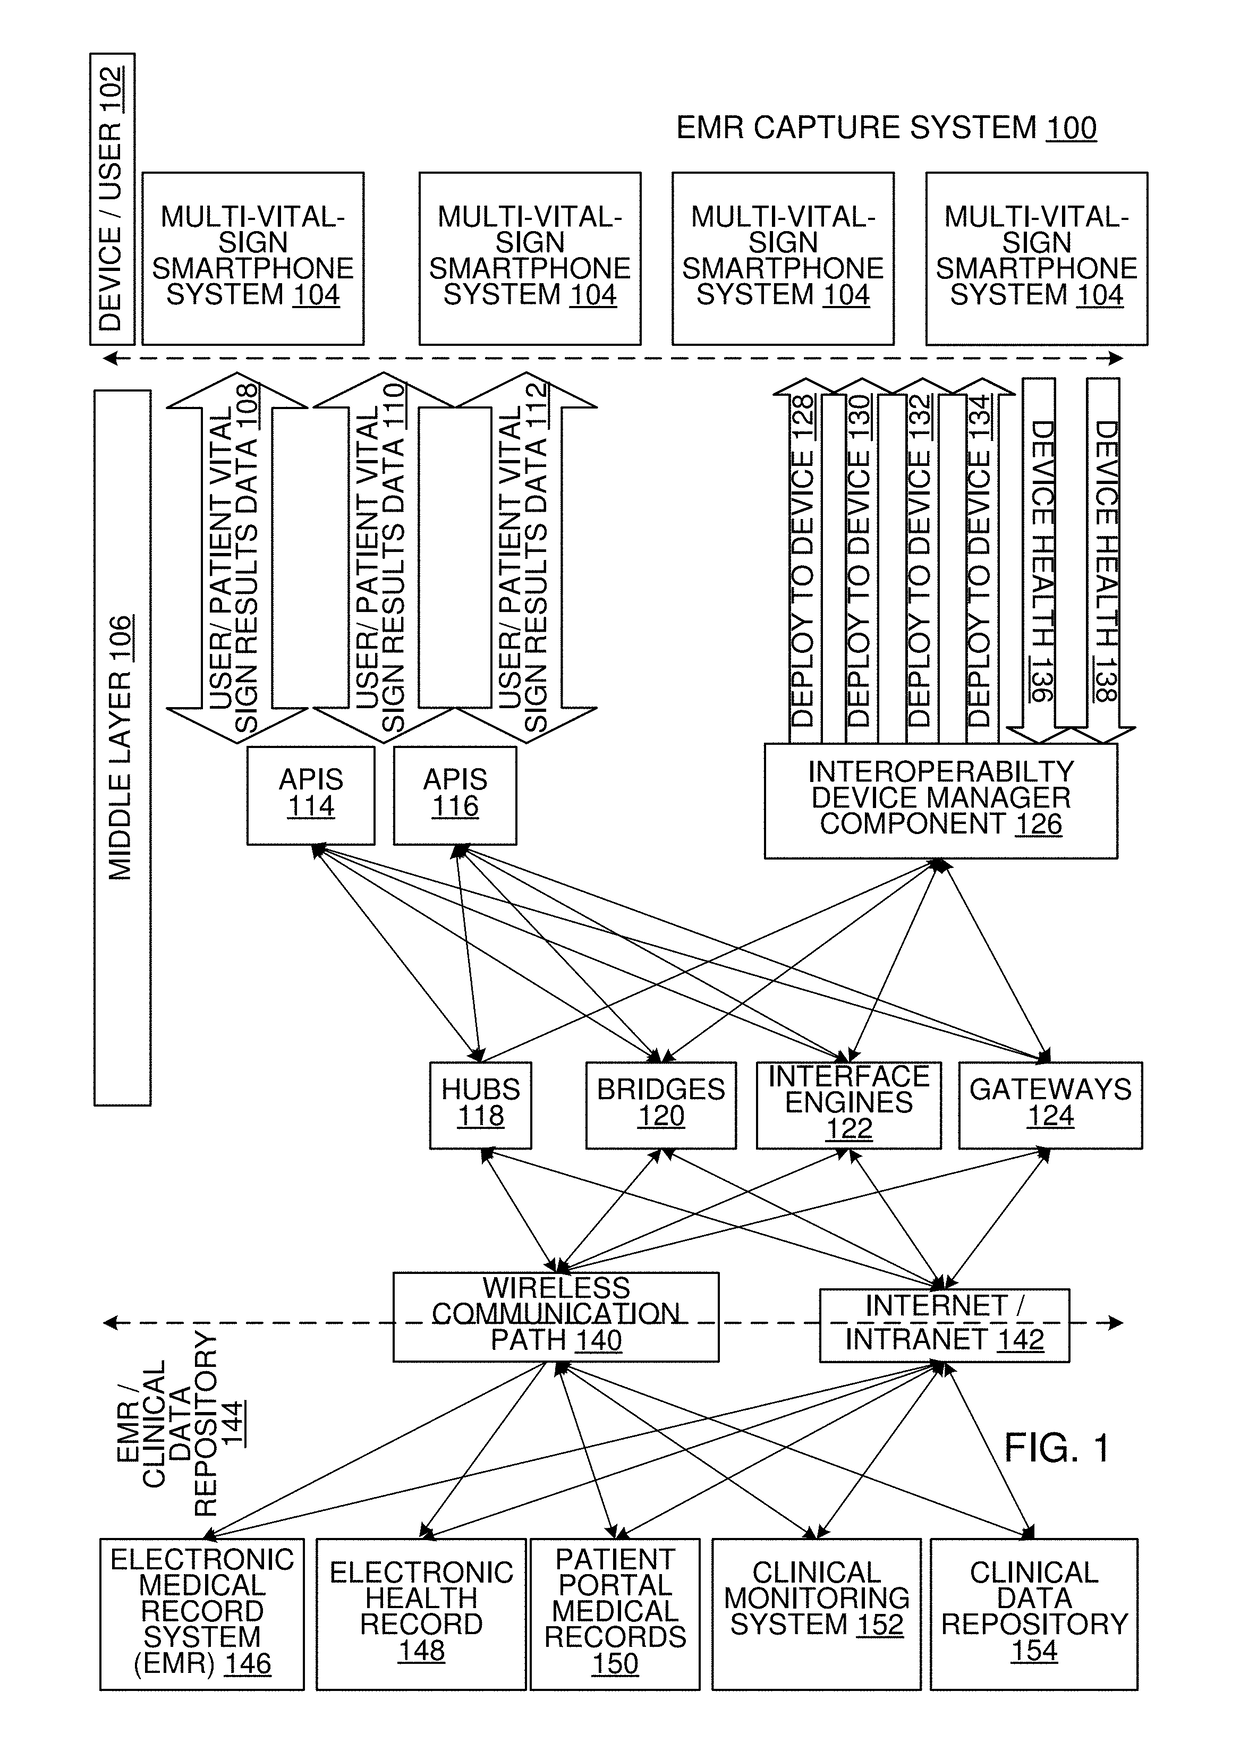 Multi-Vital-Sign Smartphone System in an Electronic Medical Records System